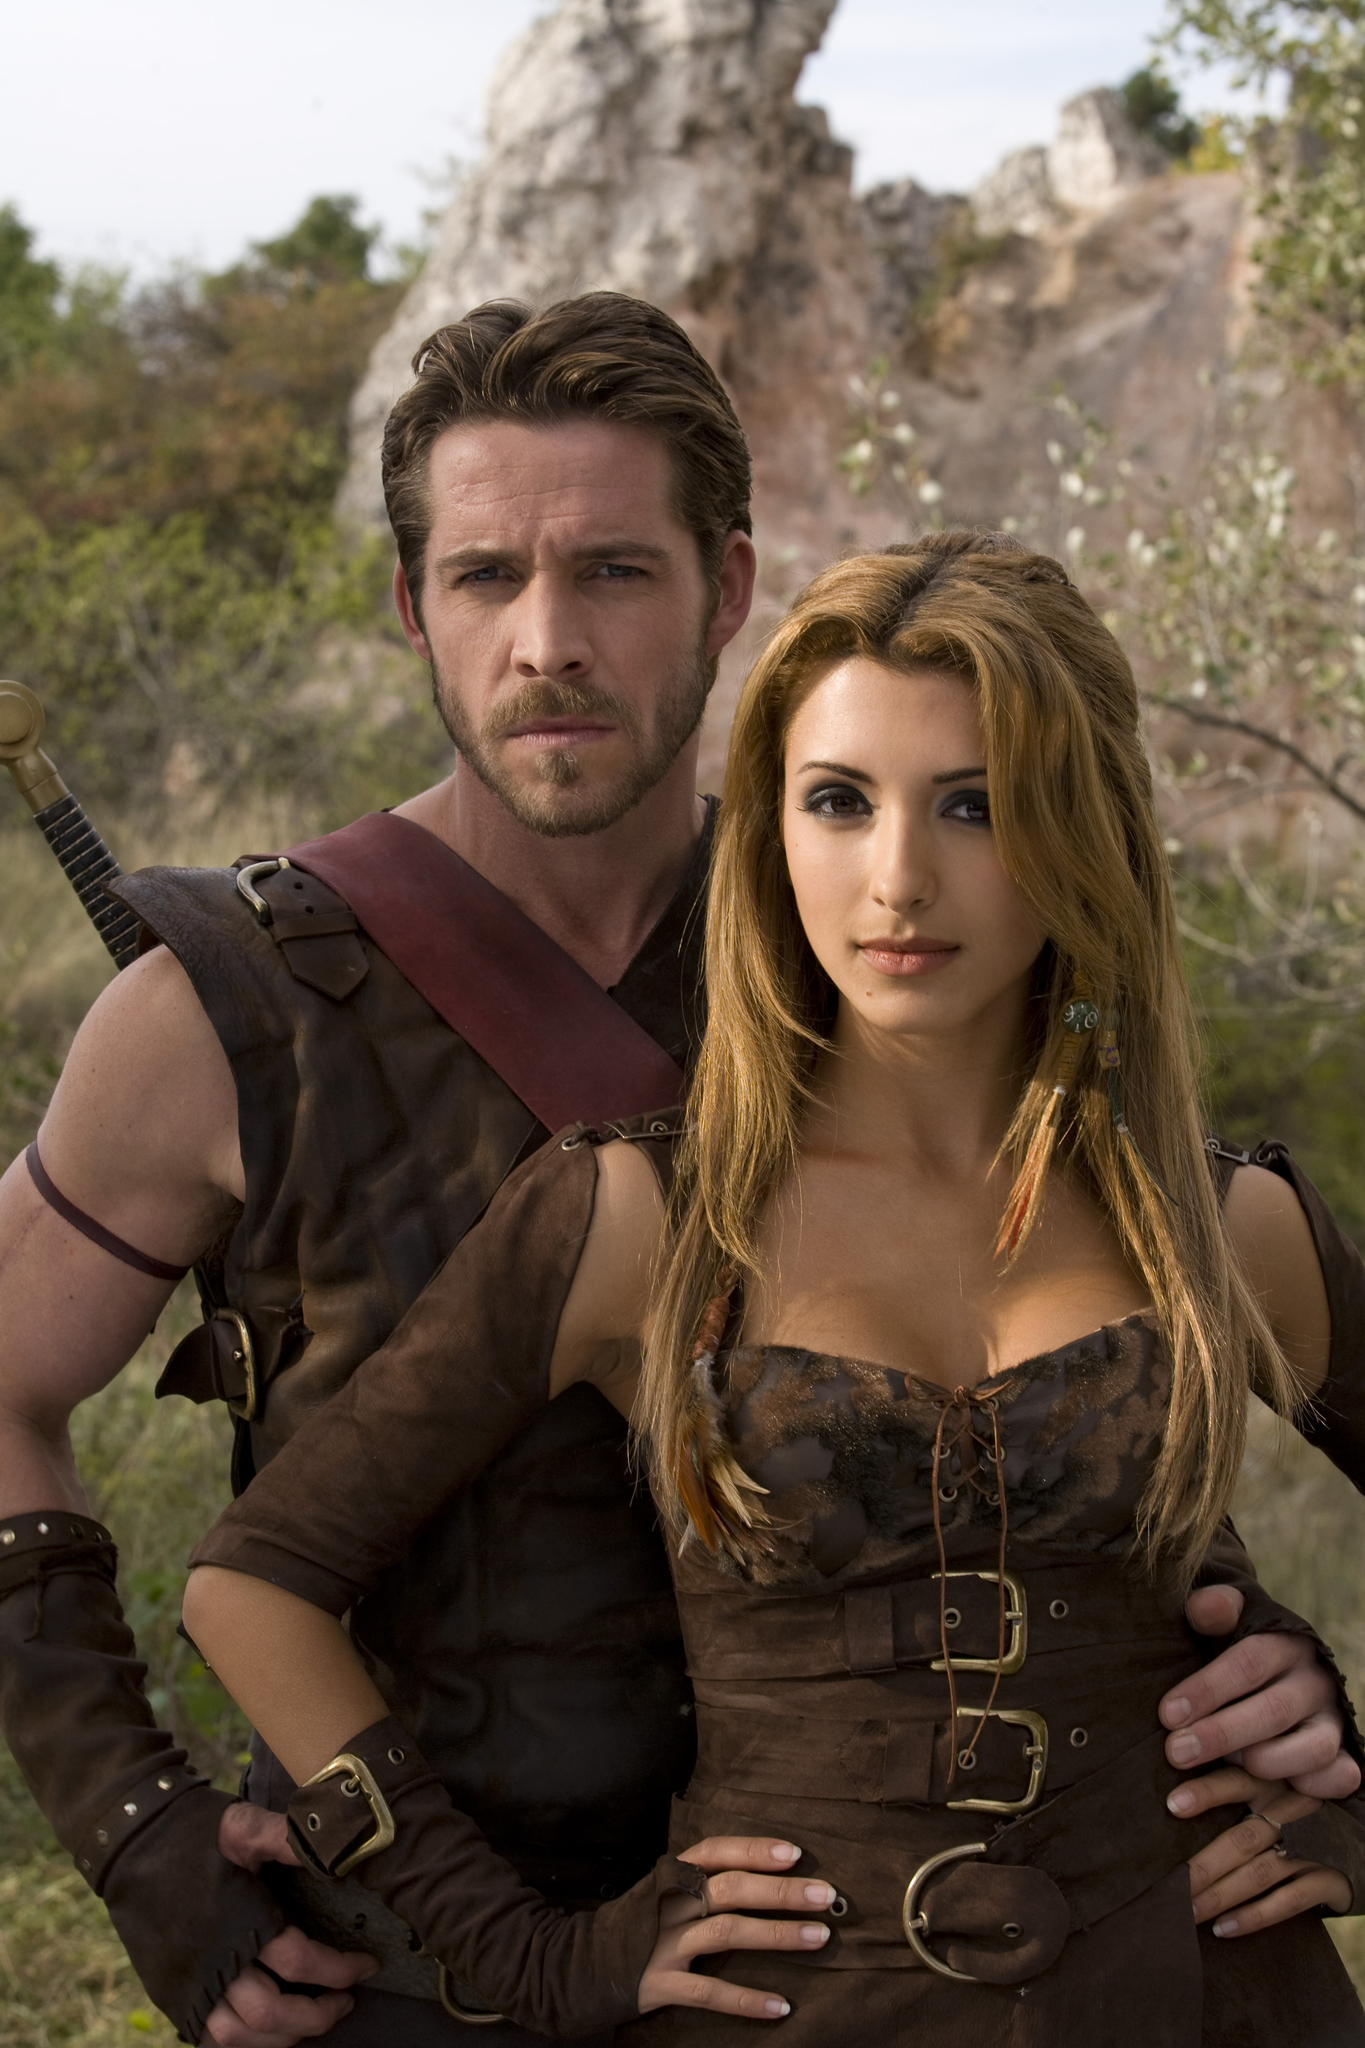 Still of Sean Maguire and India de Beaufort in Kröd Mändoon and the Flaming Sword of Fire (2009)